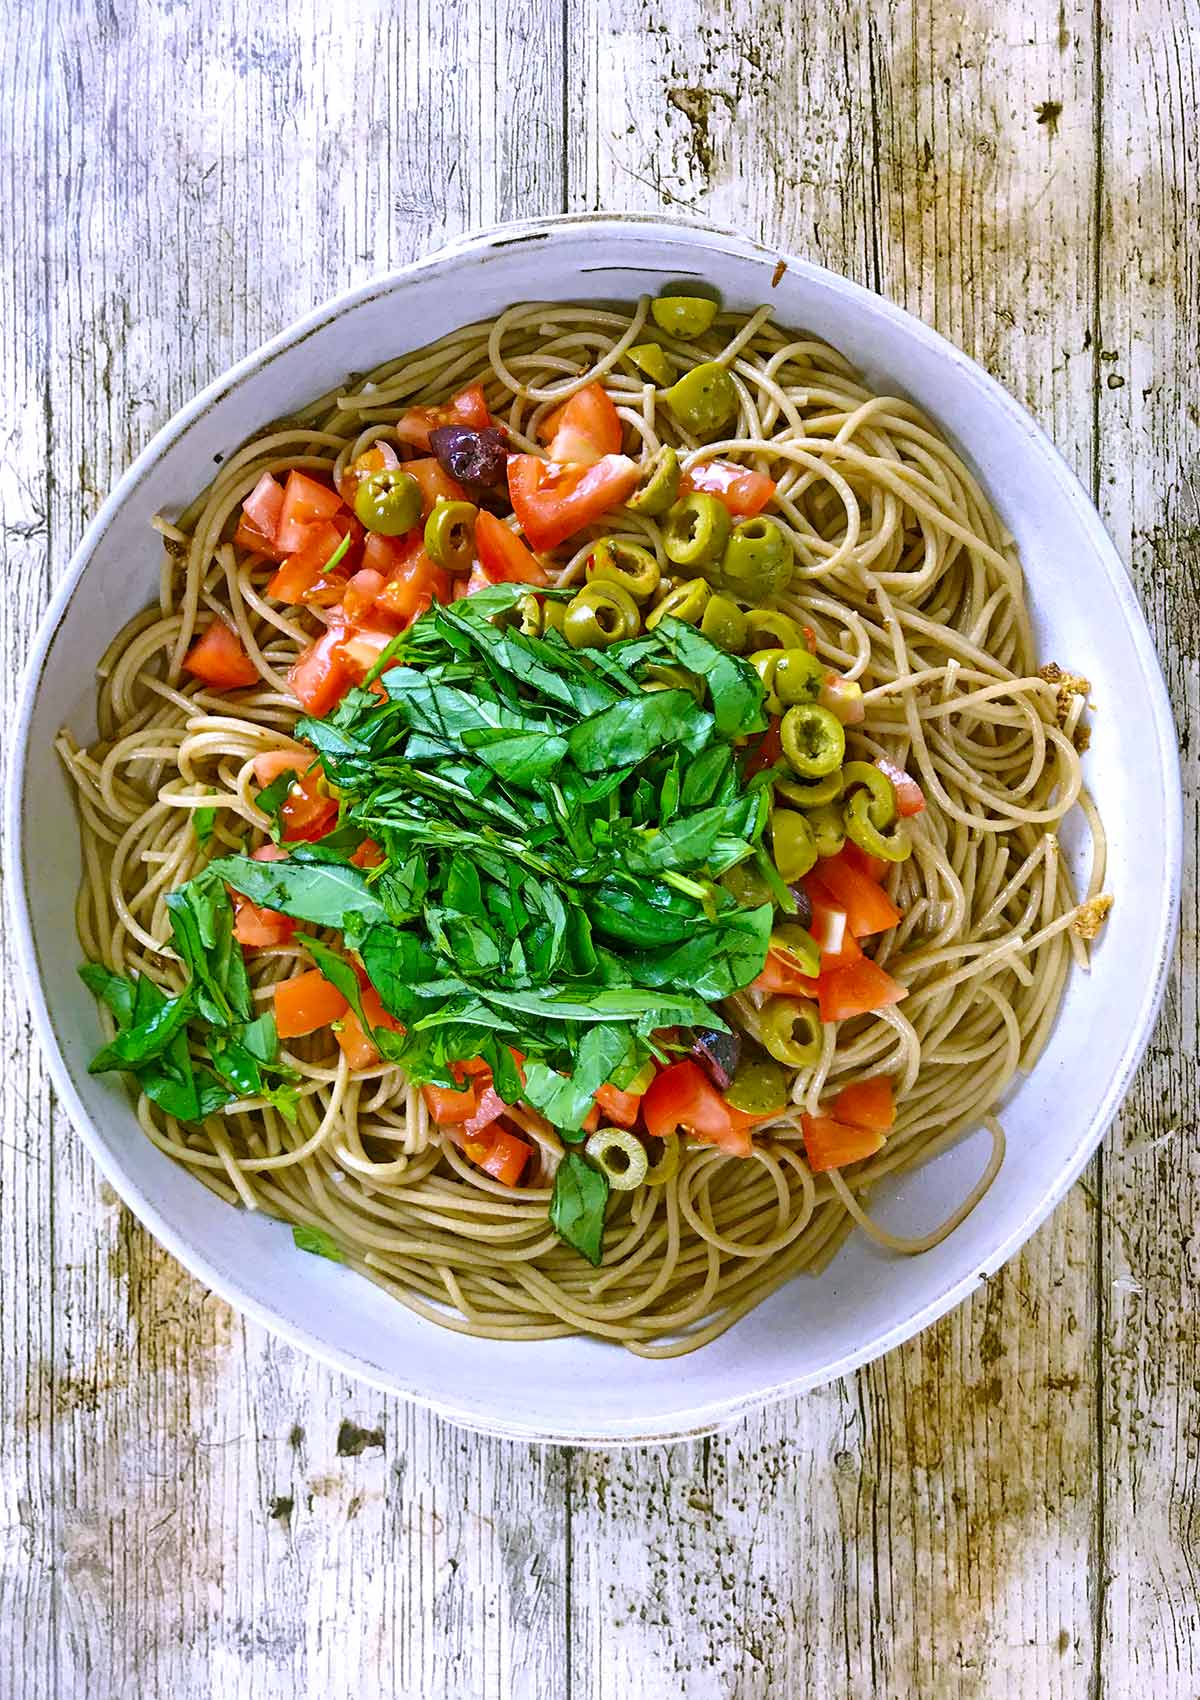 Chopped tomatoes, sliced olives and strips of basil leaves added to the spaghetti.